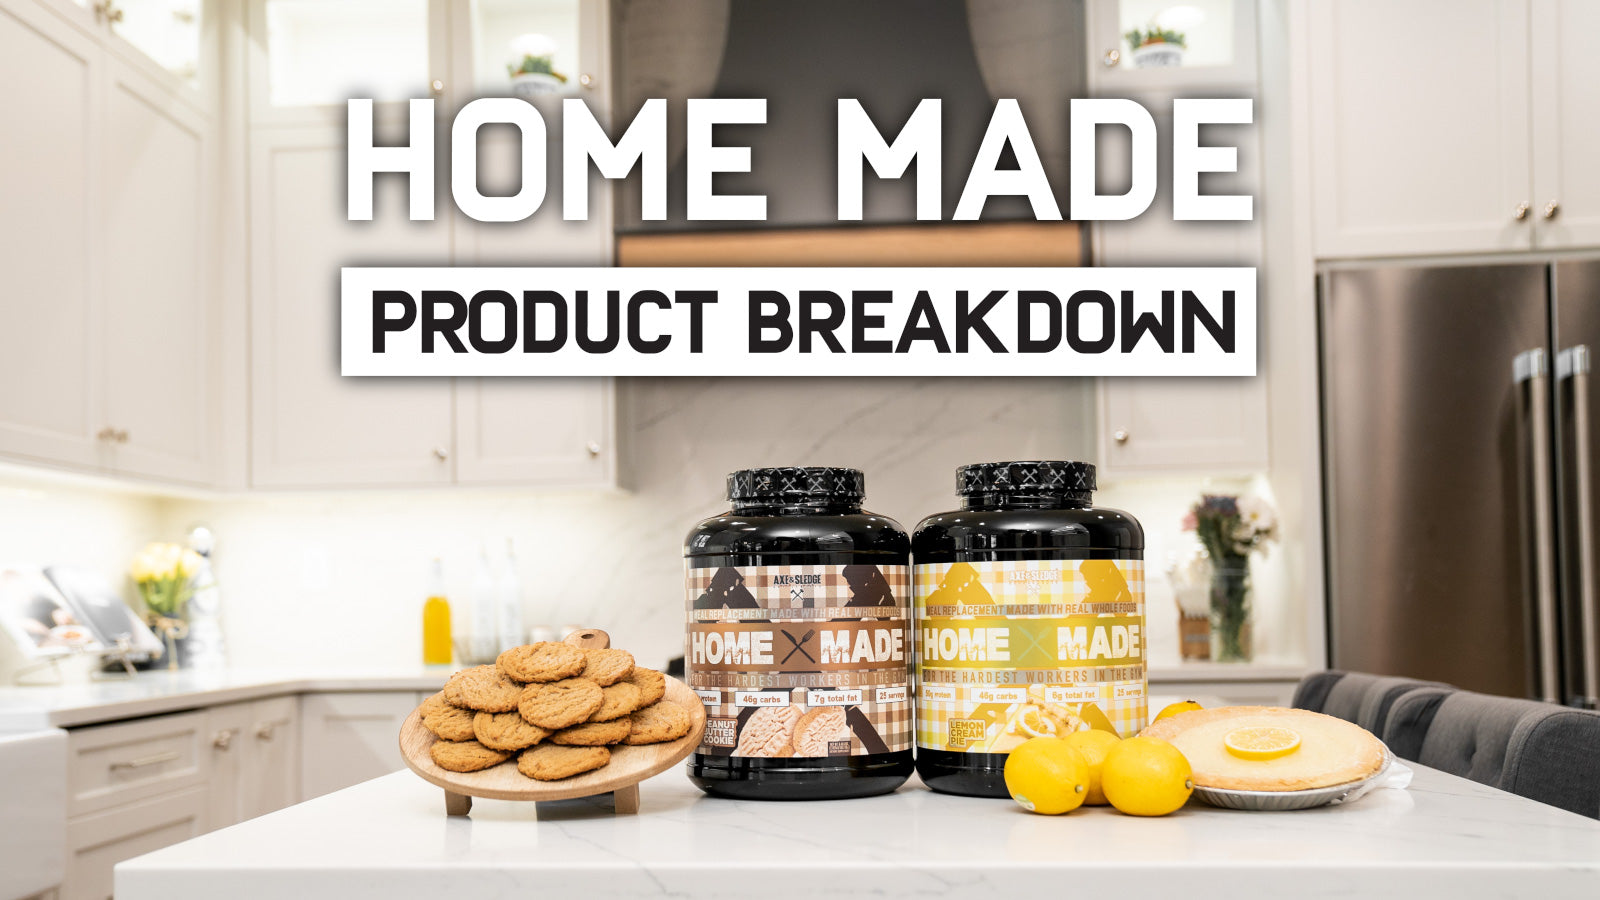 Home Made: A Premium Meal Replacement Powder For Everyone